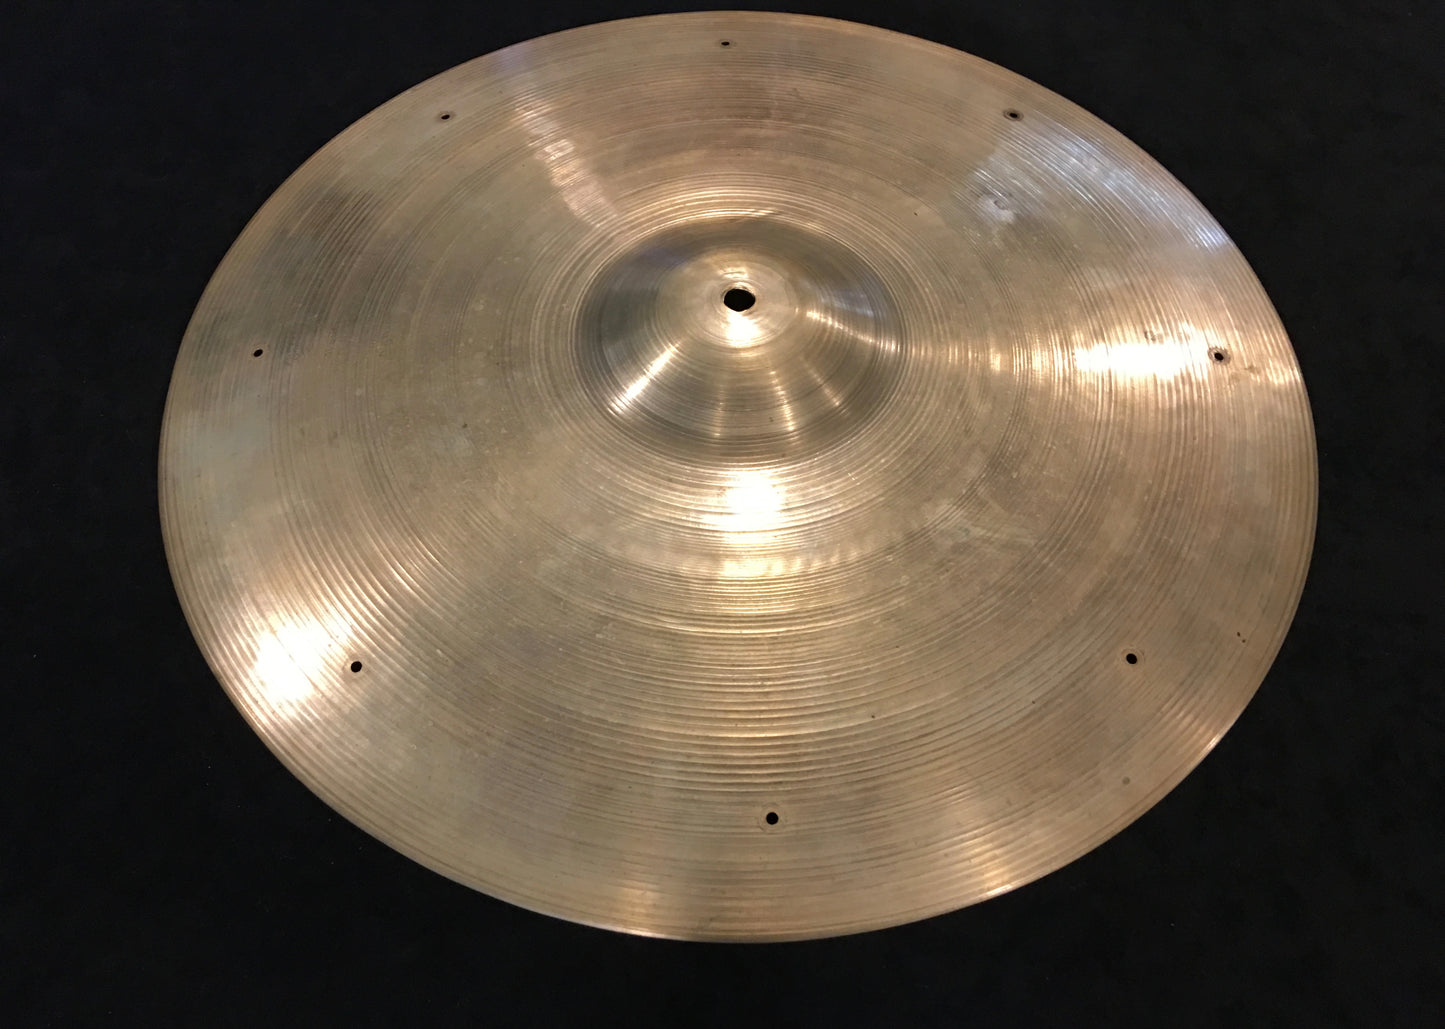 19" Zildjian A 1950's Block Stamp Hammered Crash / Ride Sizzle Cymbal 1836g #524